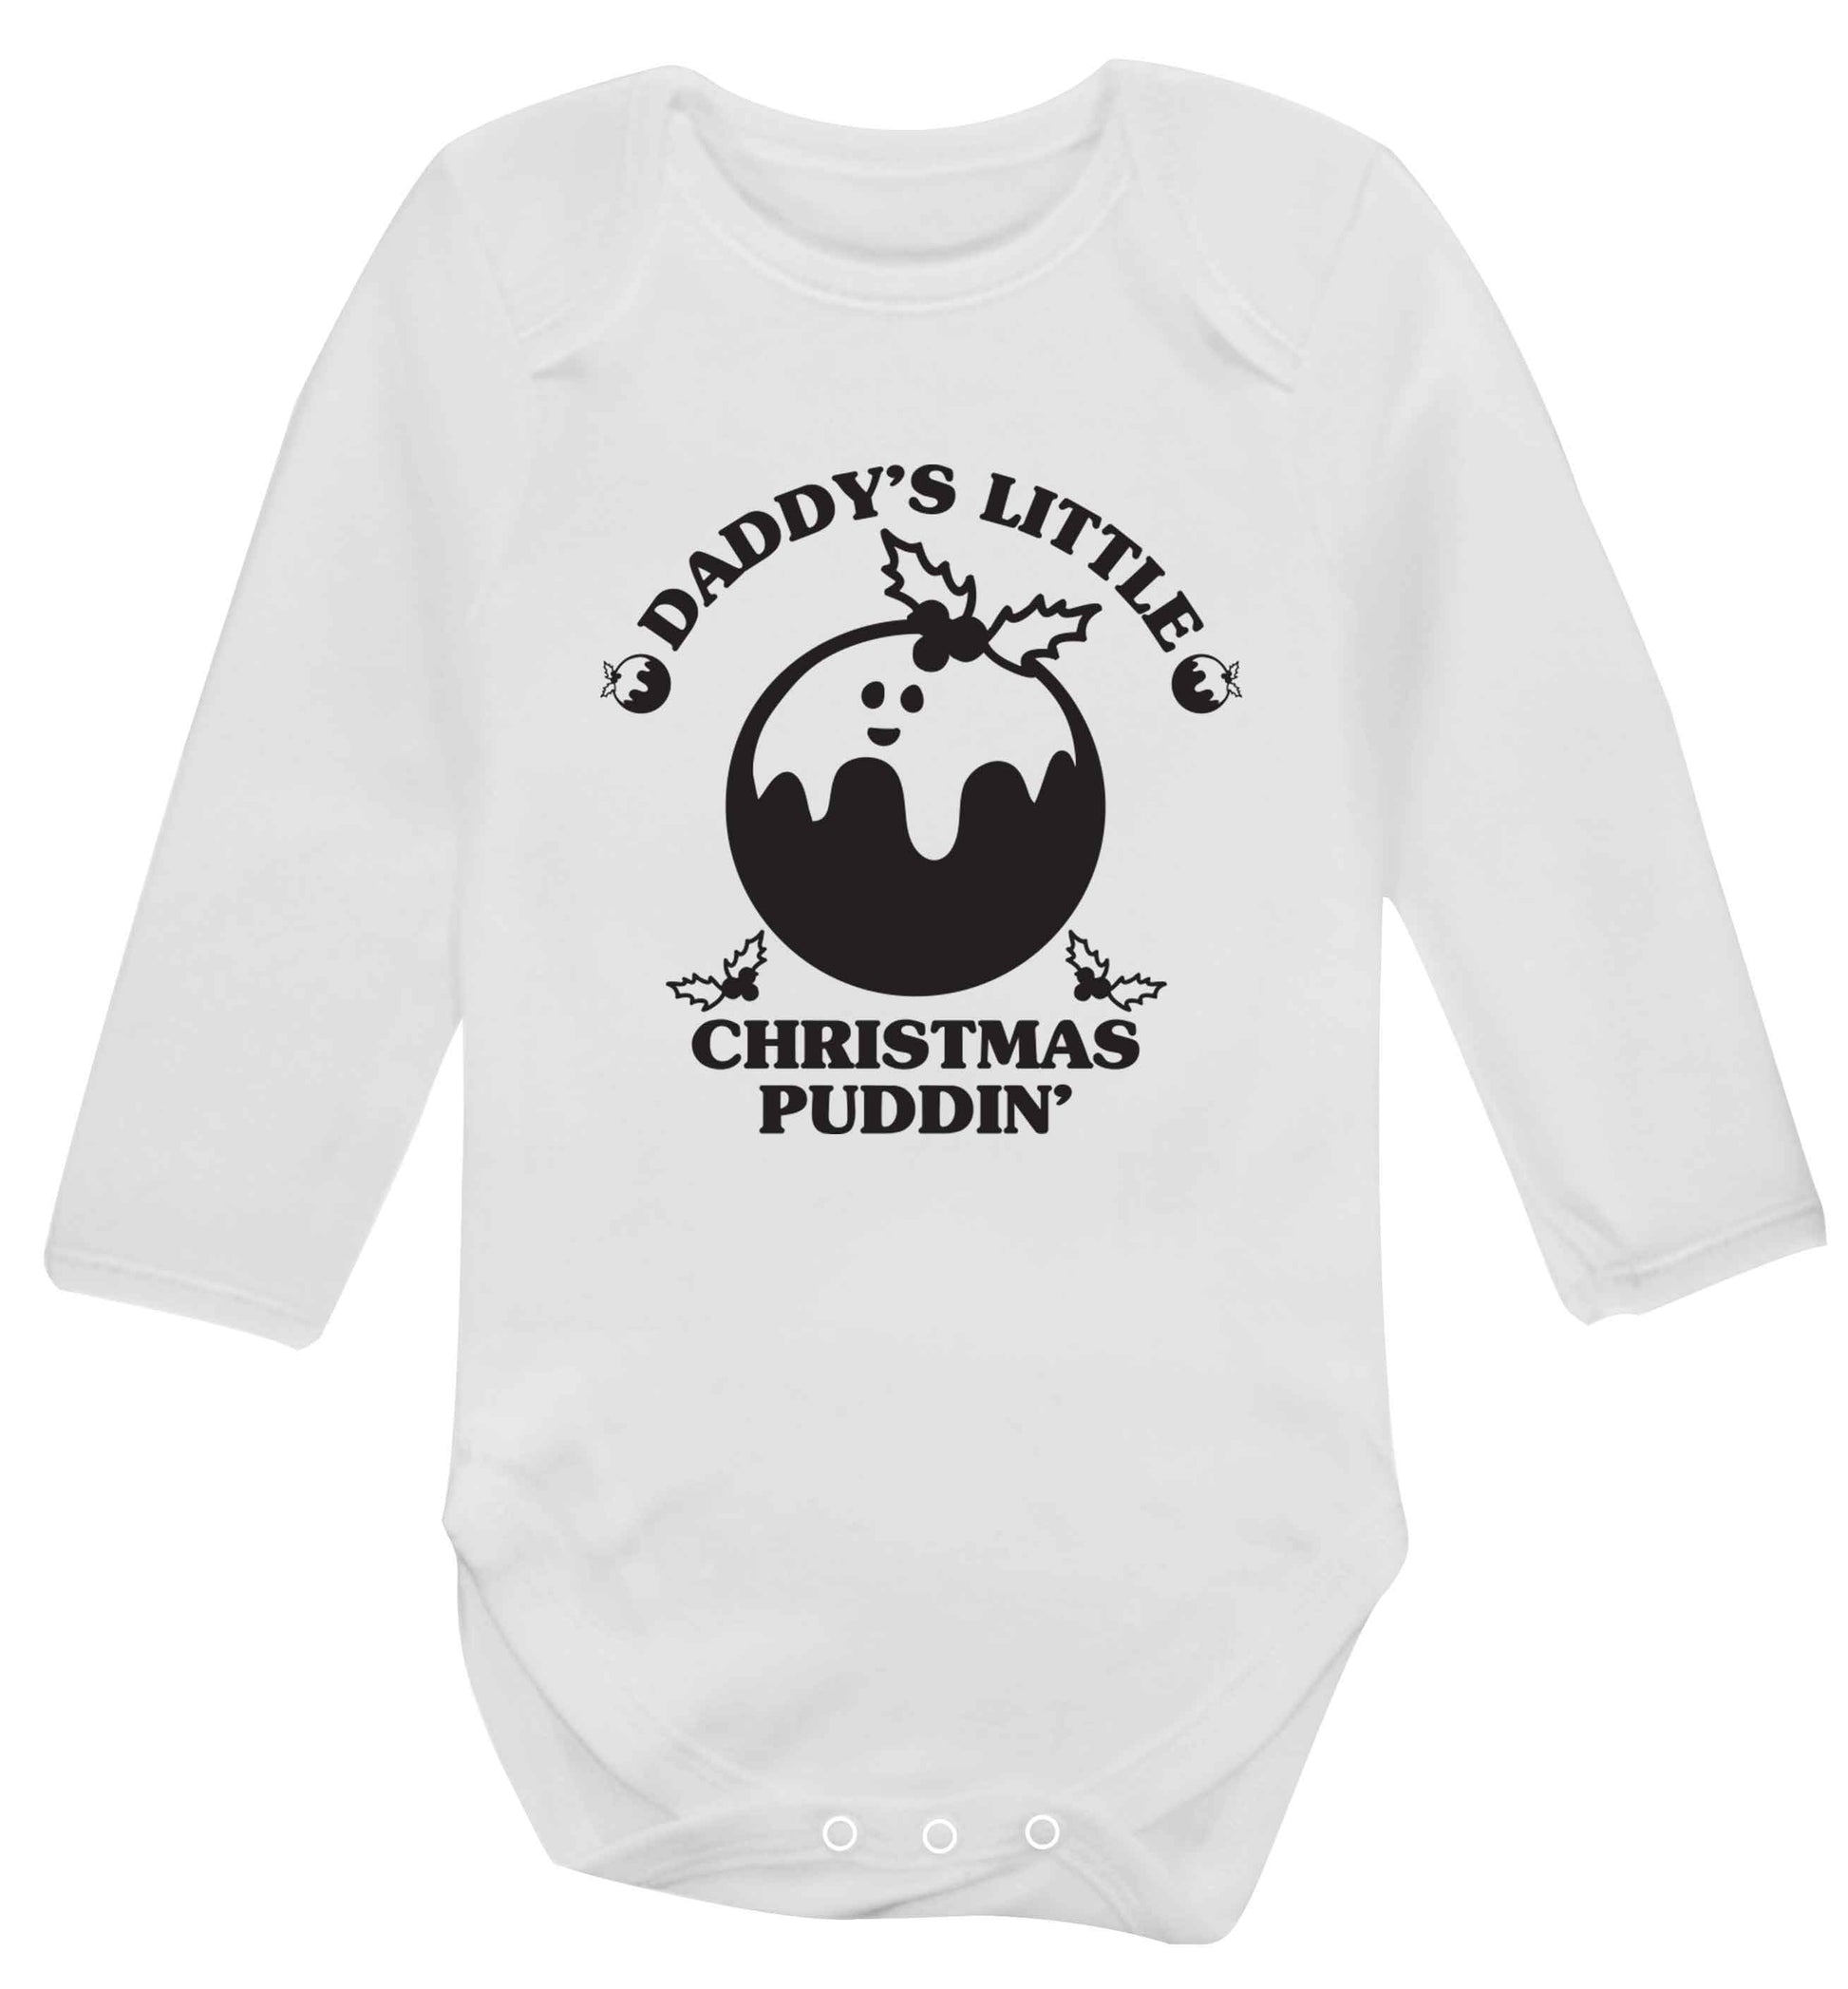 Daddy's little Christmas puddin' Baby Vest long sleeved white 6-12 months